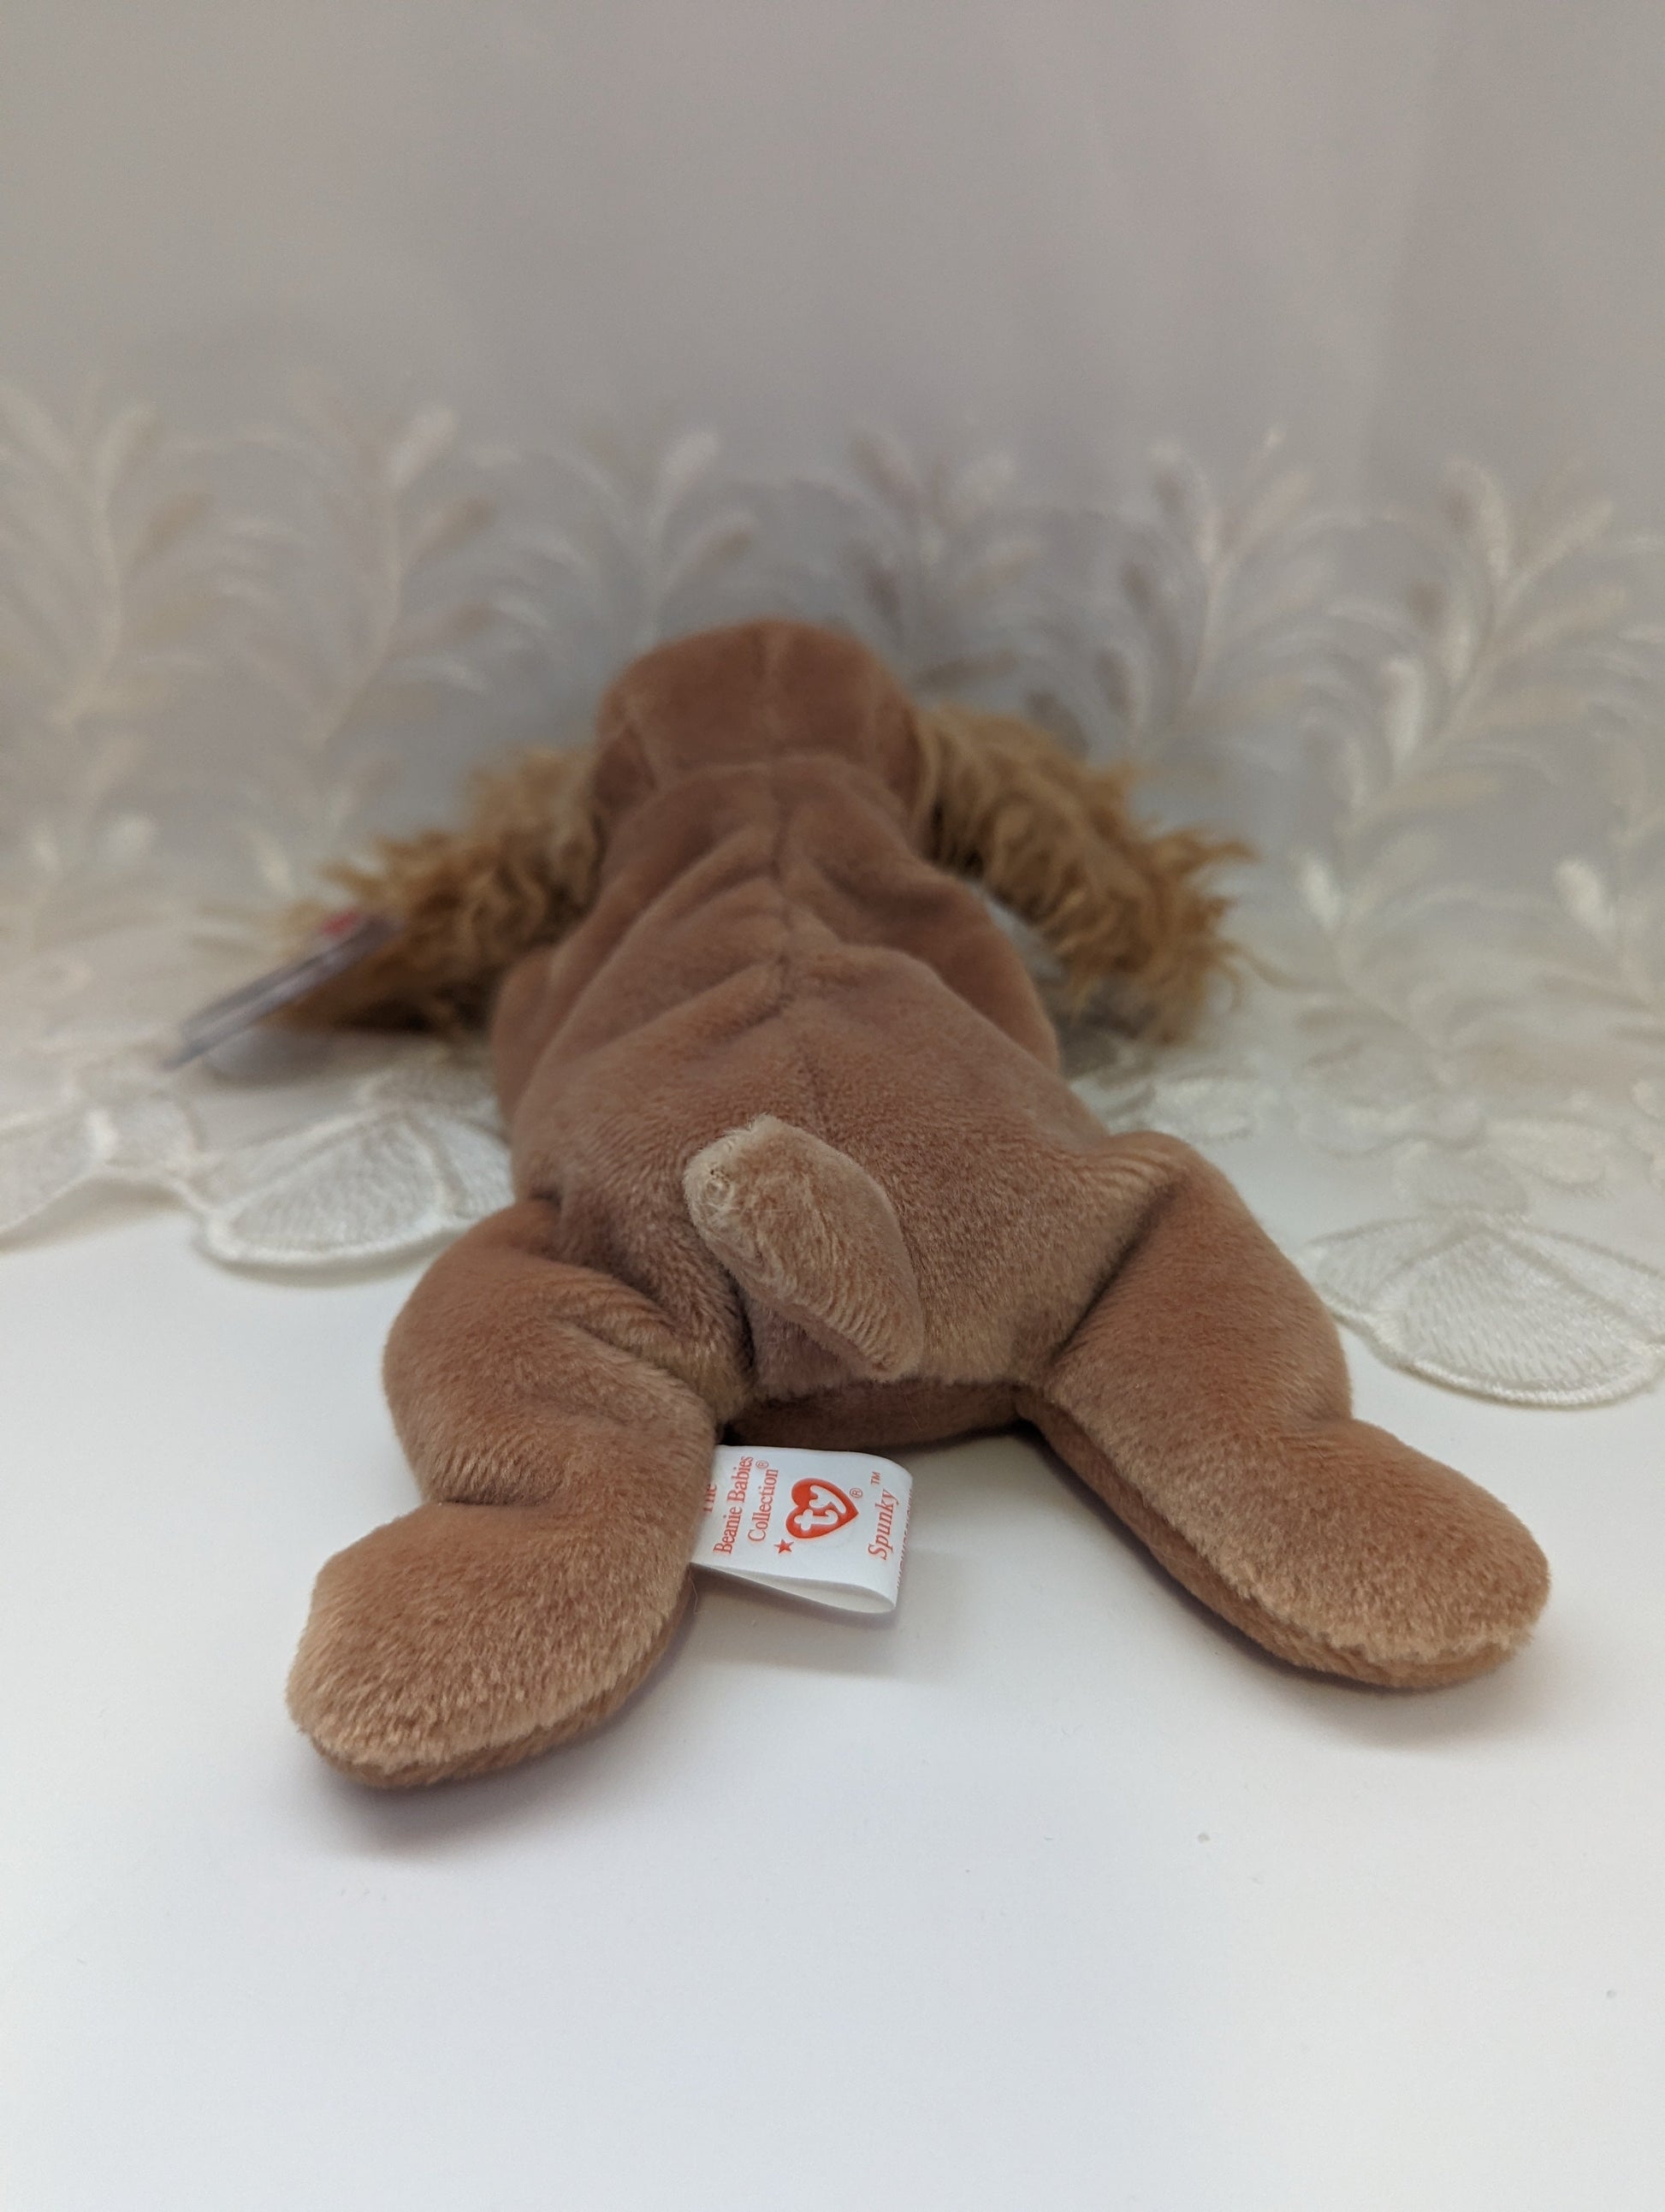 Ty Beanie Baby - Spunky The Cocker Spaniel Dog (8in) - Vintage Beanies Canada